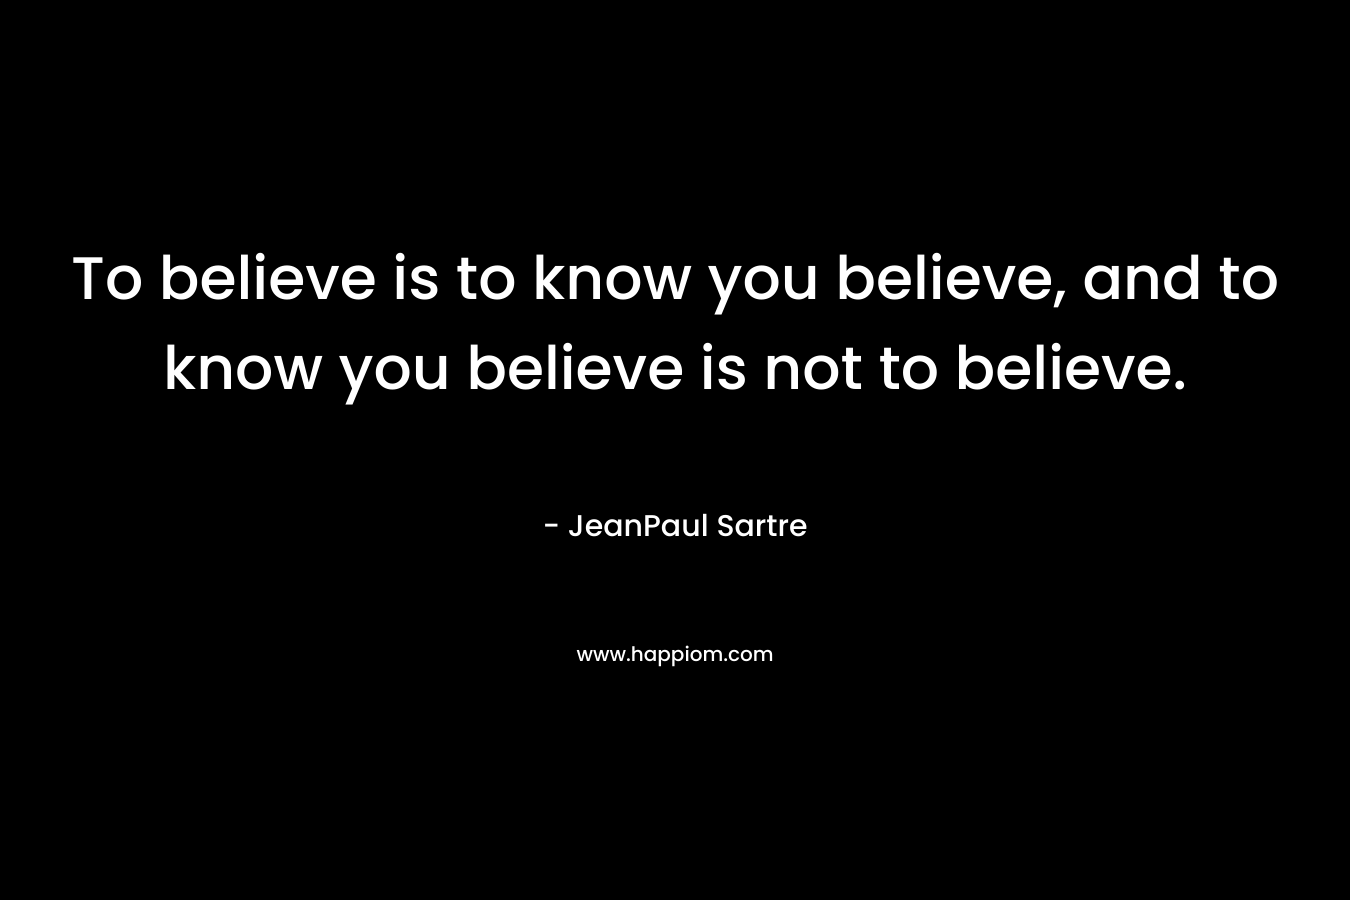 To believe is to know you believe, and to know you believe is not to believe.